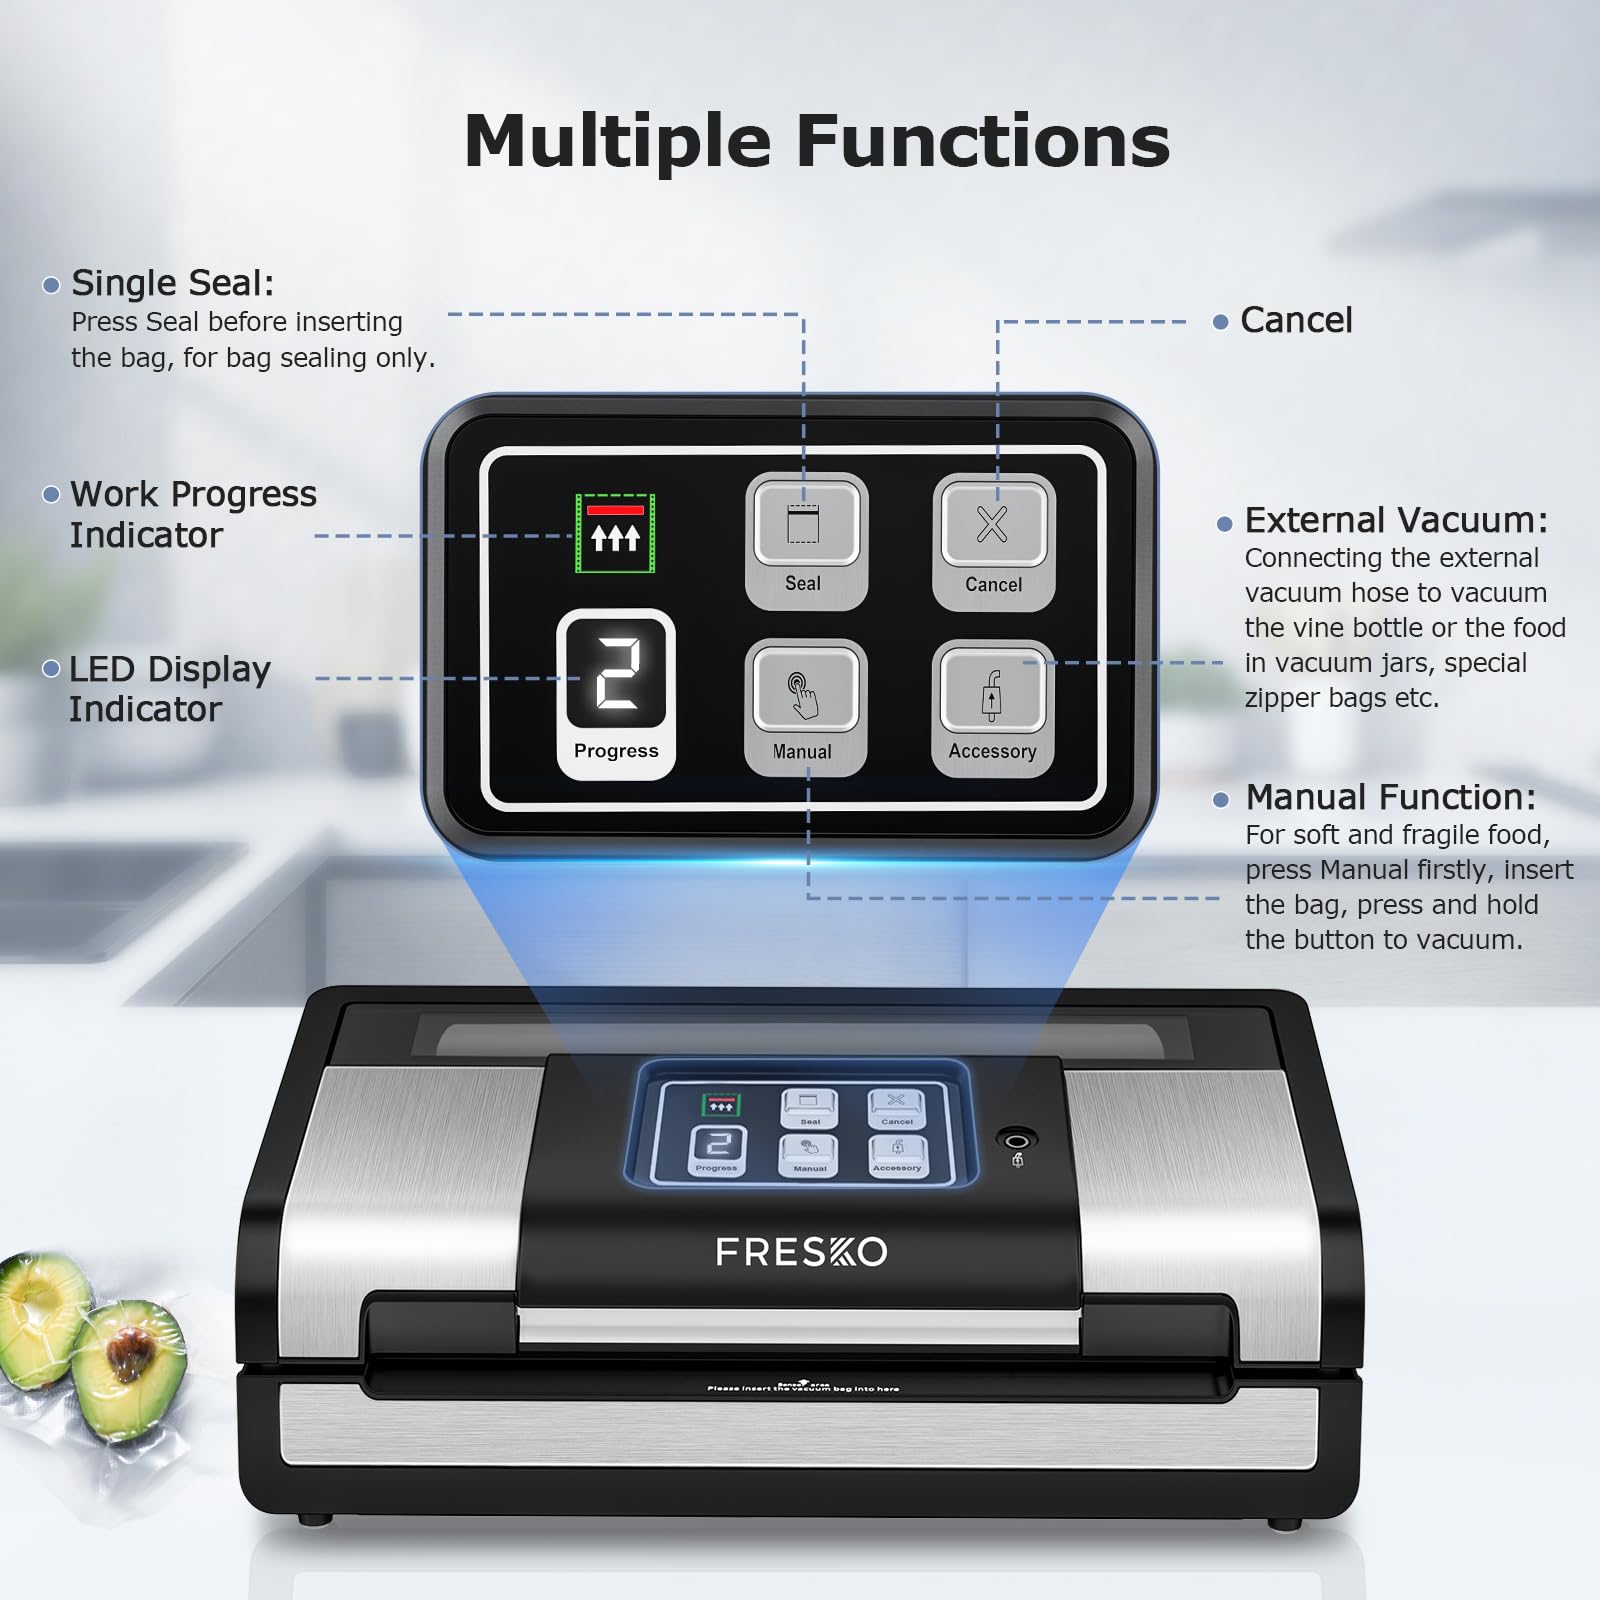 FRESKO Smart Vacuum Sealer Pro, Full Automatic Food Sealer Machine with Auto Dry/Moist Detection, Roll Bag and Built-in Cutter, Powerful Seal a Meal Sealer Machine for Food Storage Saver